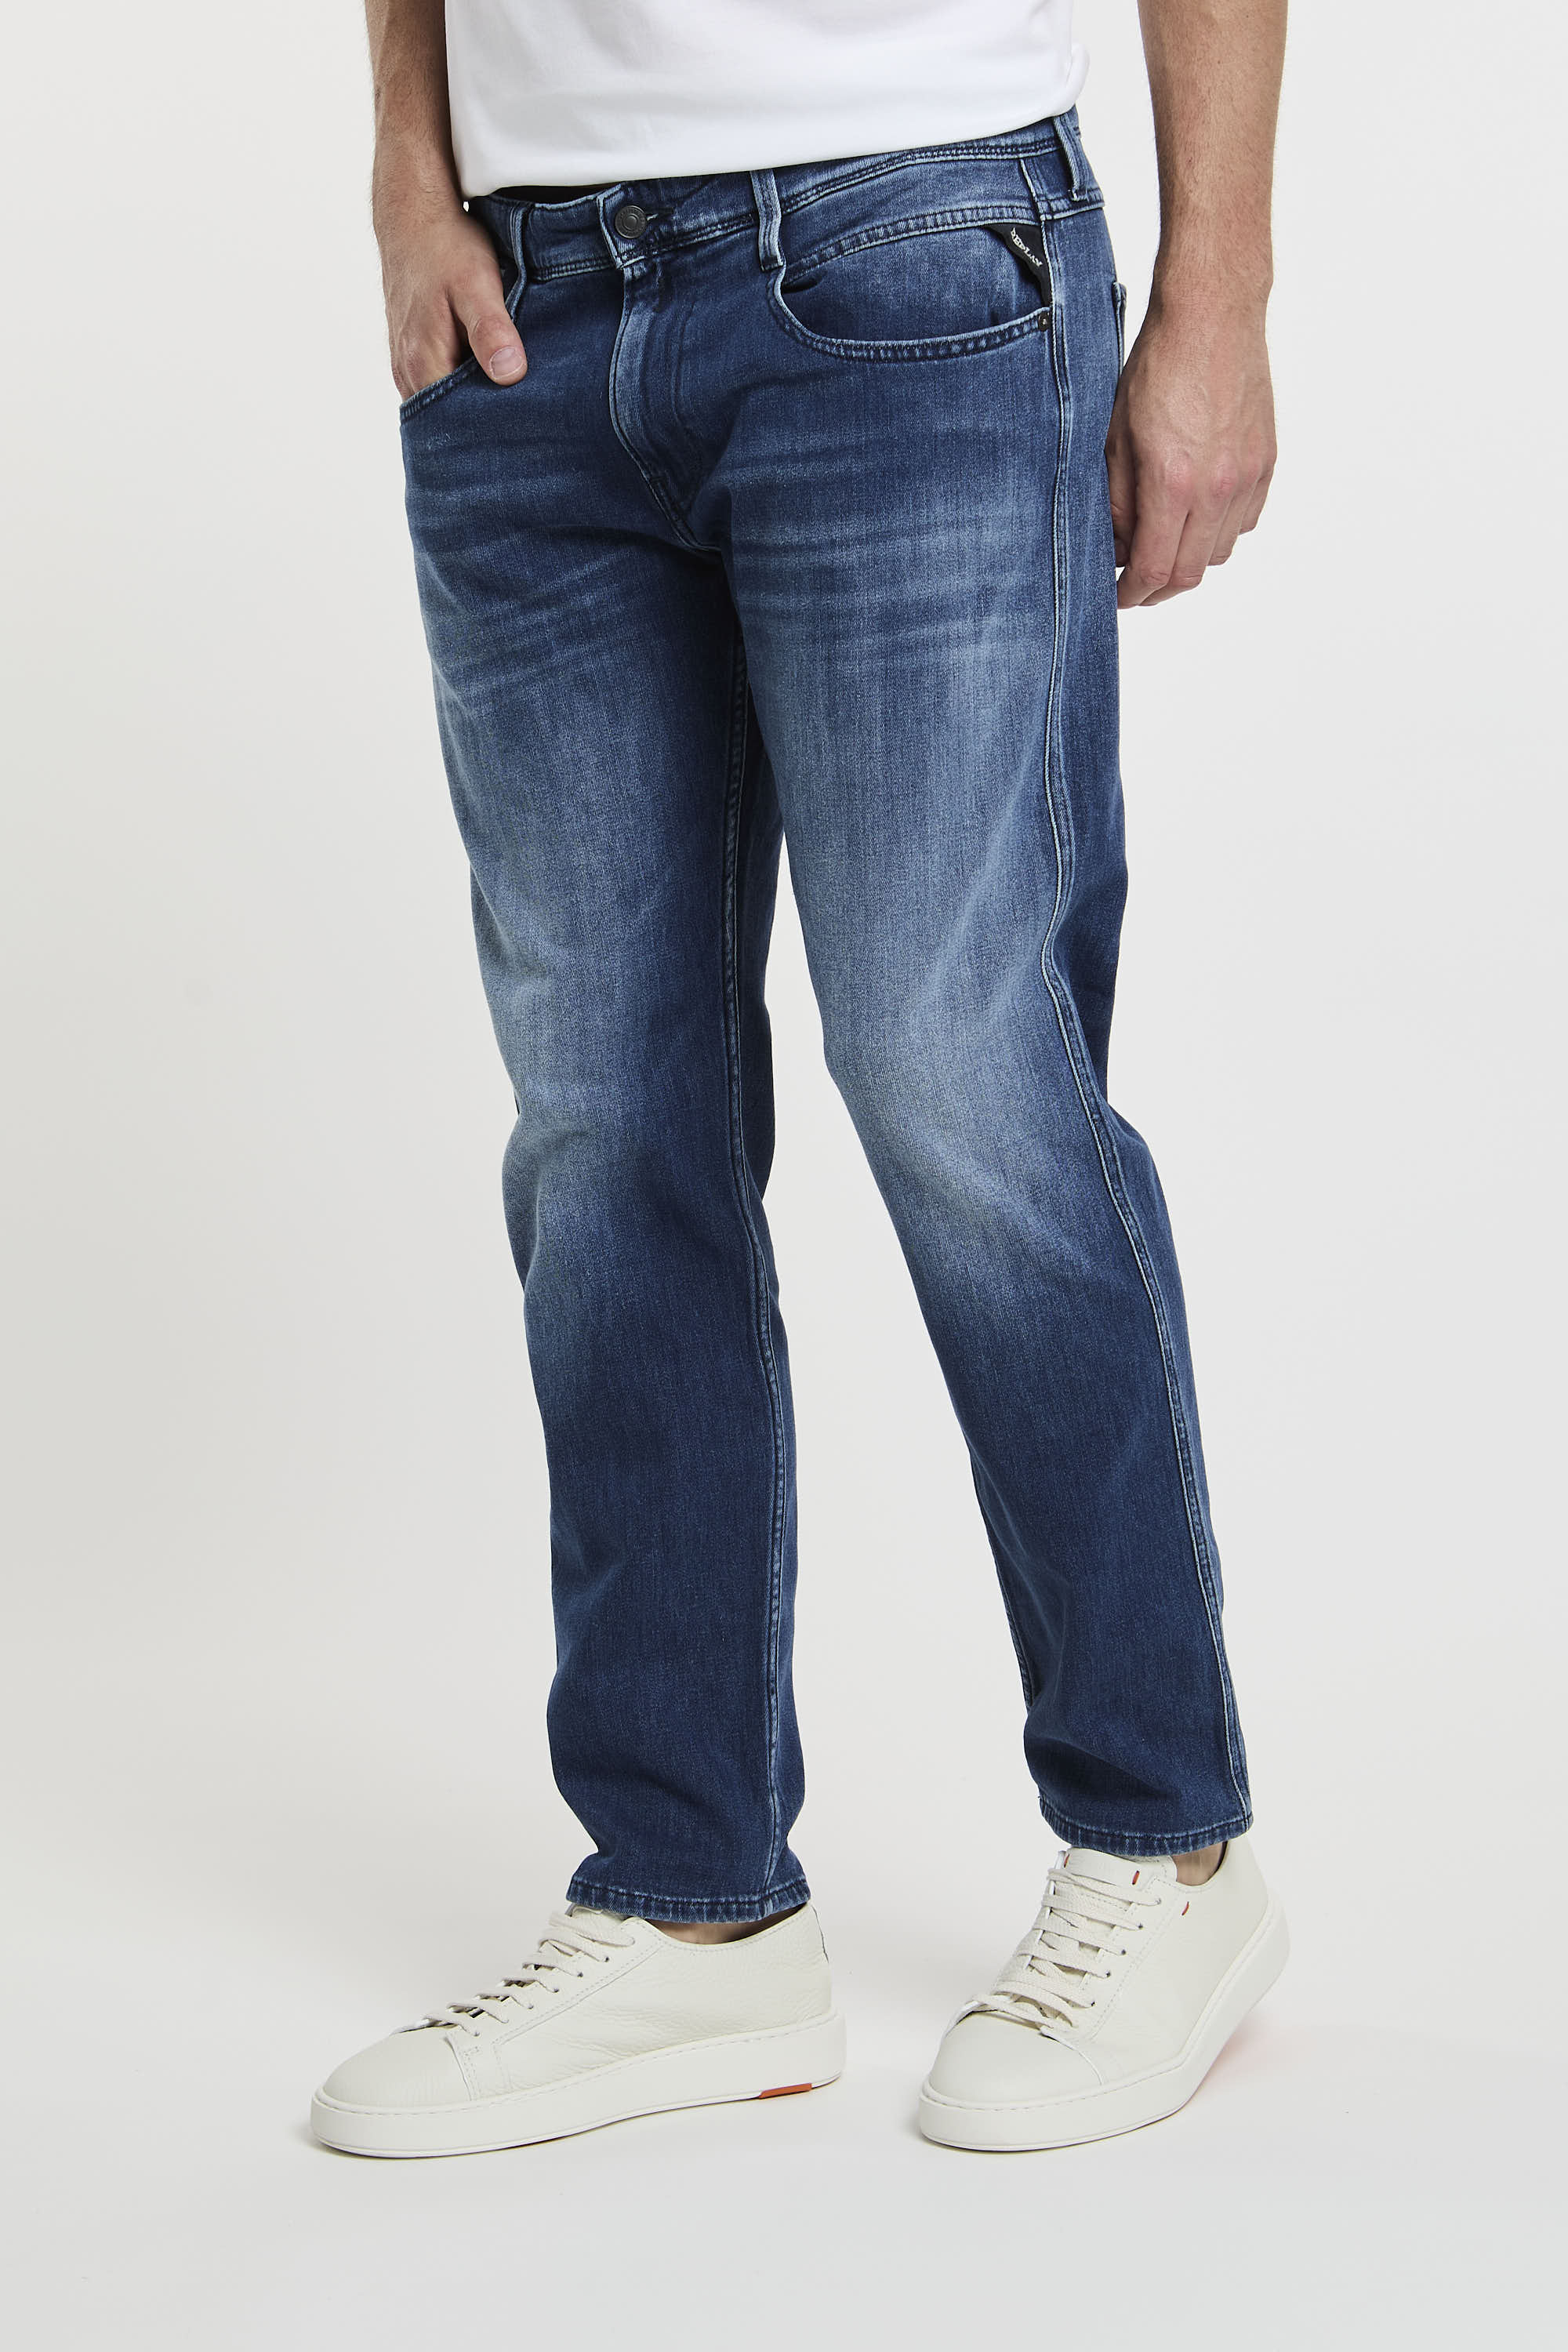 Replay Jeans Slim Fit Anbass Baumwolle/Polyester Denim-1